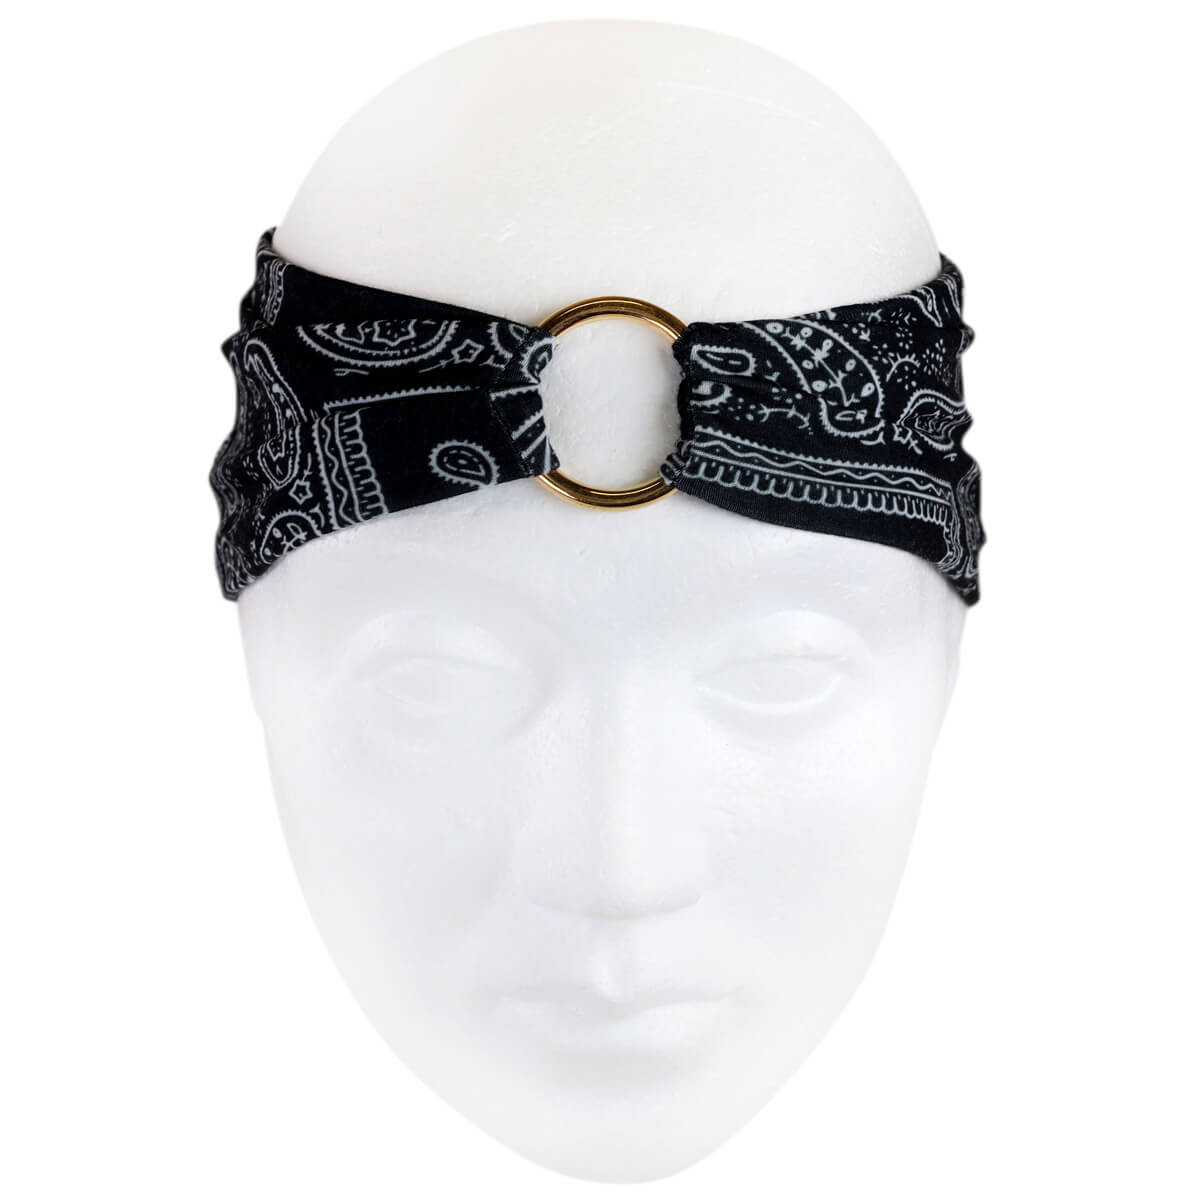 A pale patterned elastic fabric collar with decoration